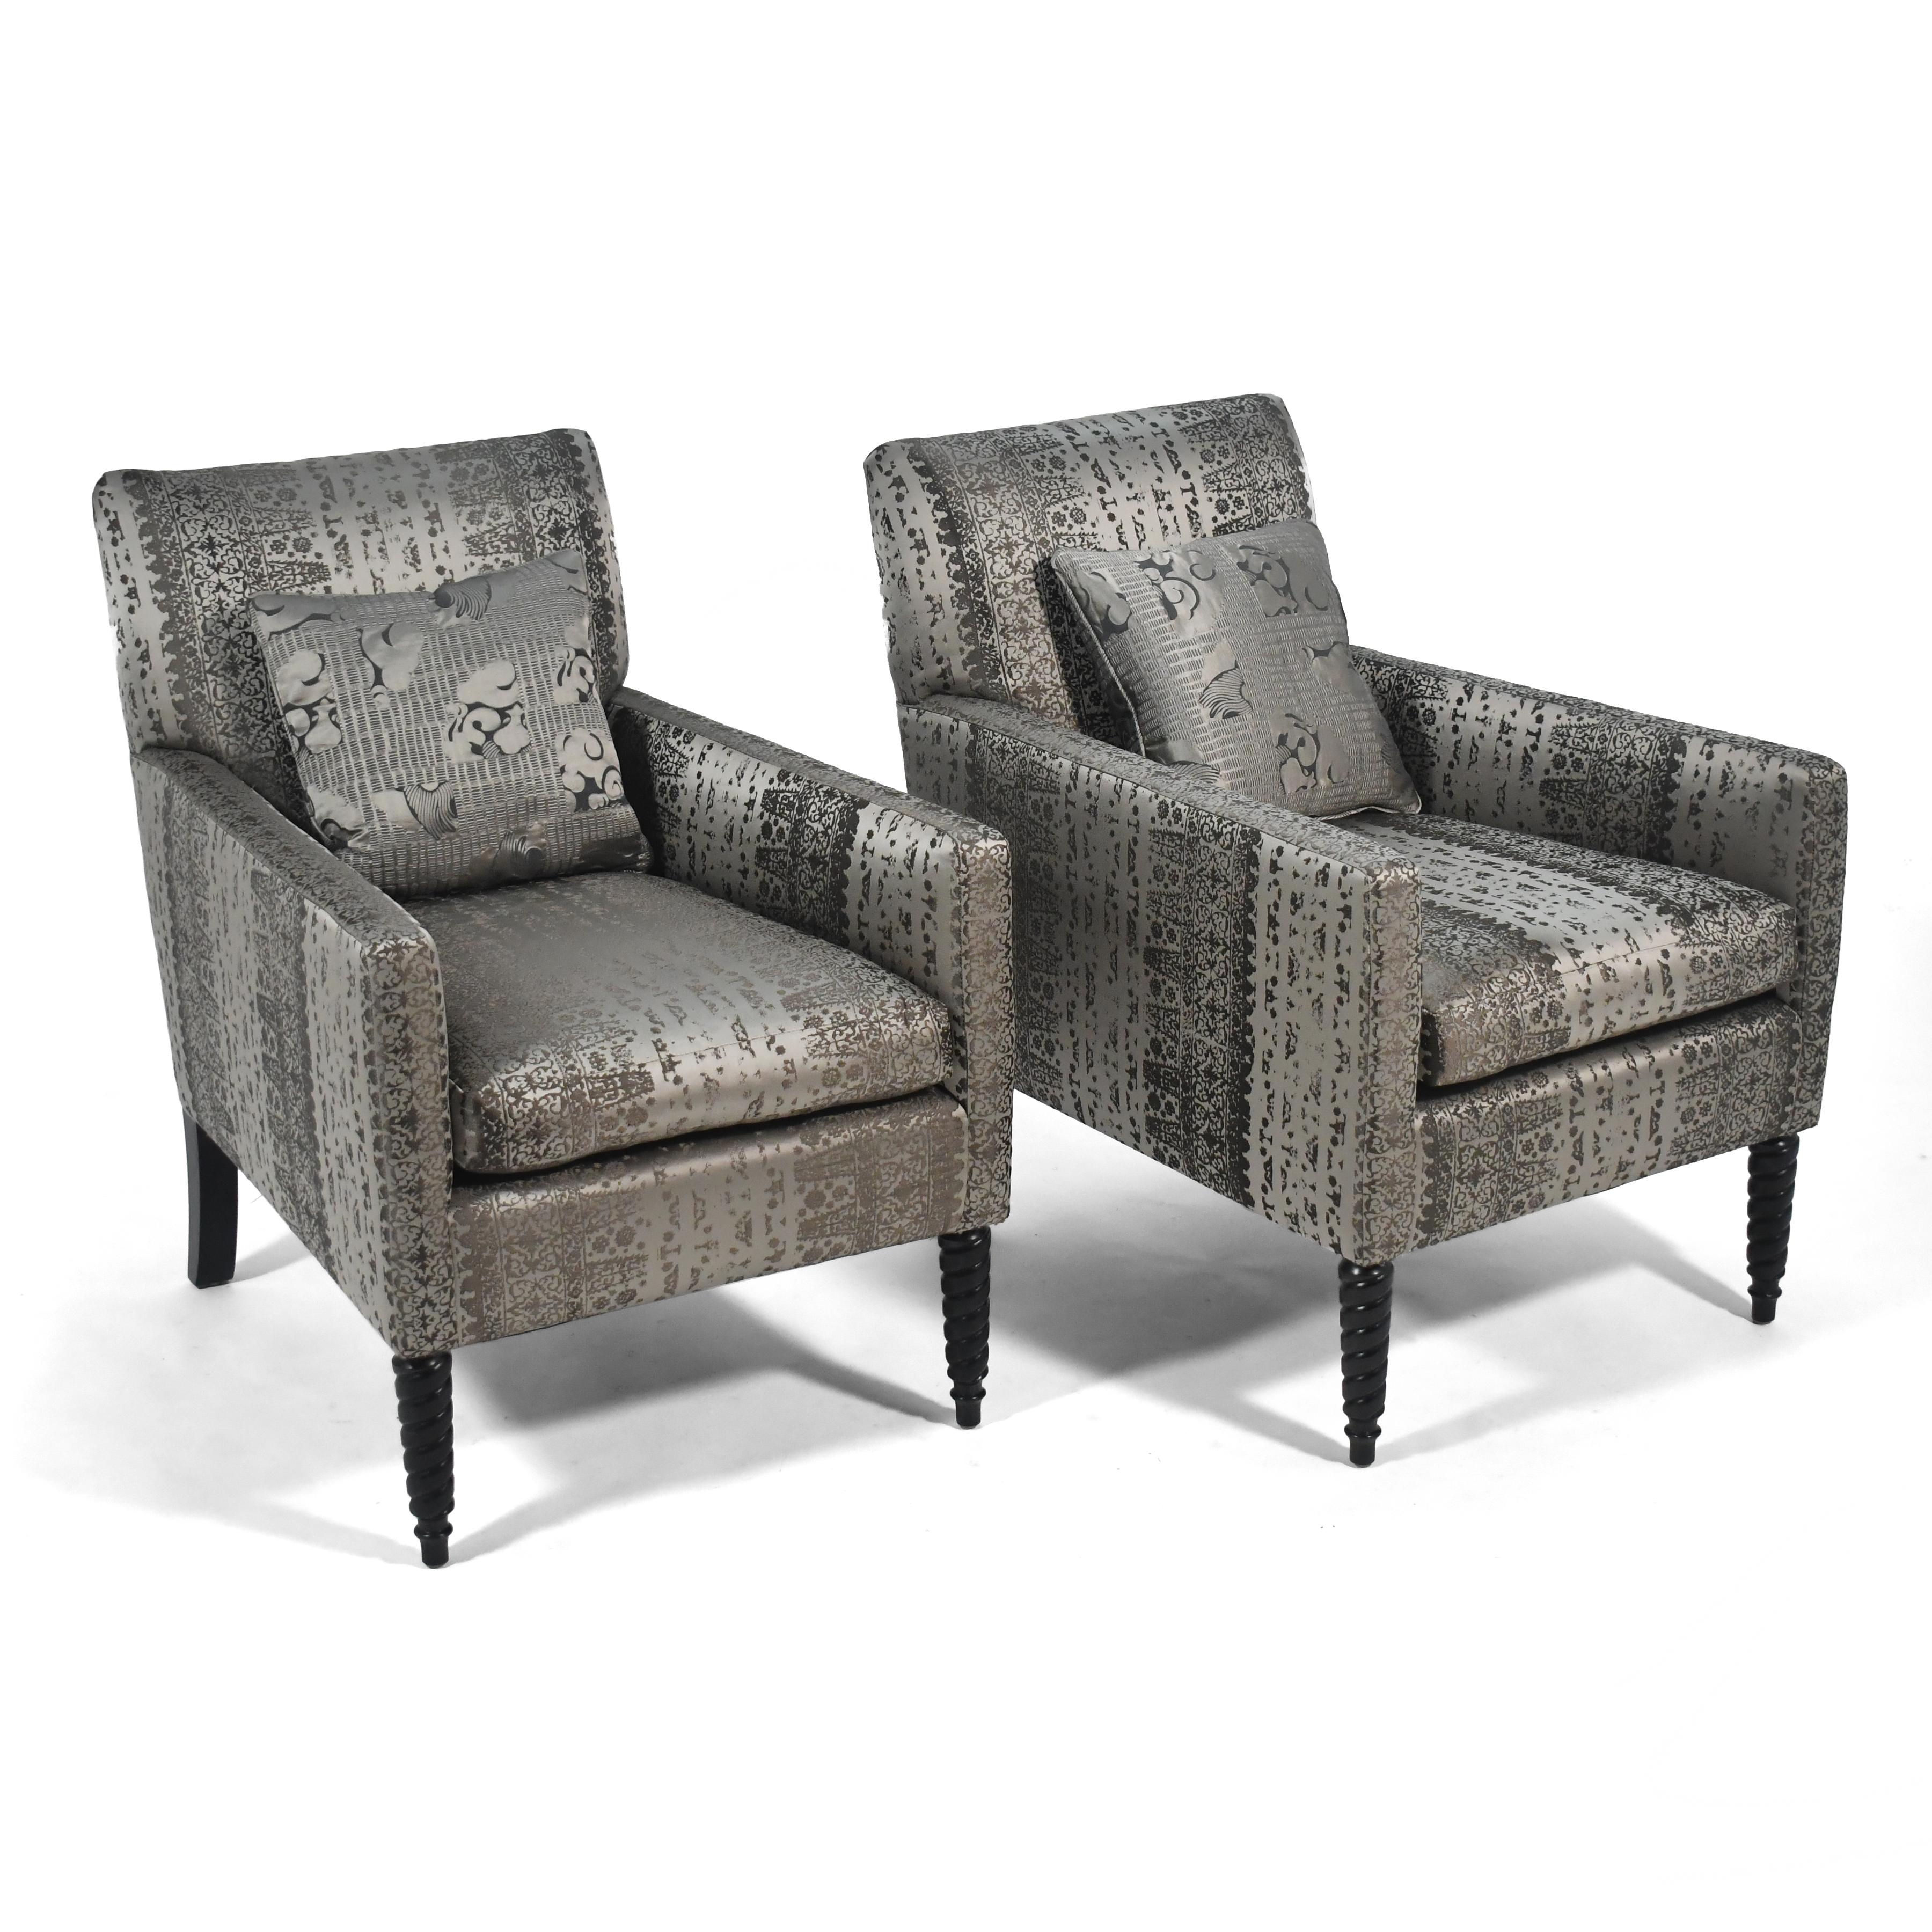 This pair of striking lounge chairs by Donghia feature crisply tailored upholstered bodies supported by sculptural legs– the front being turned with pleasing details, the rear with a sexy curve. The silver patterned upholstery adds an almost